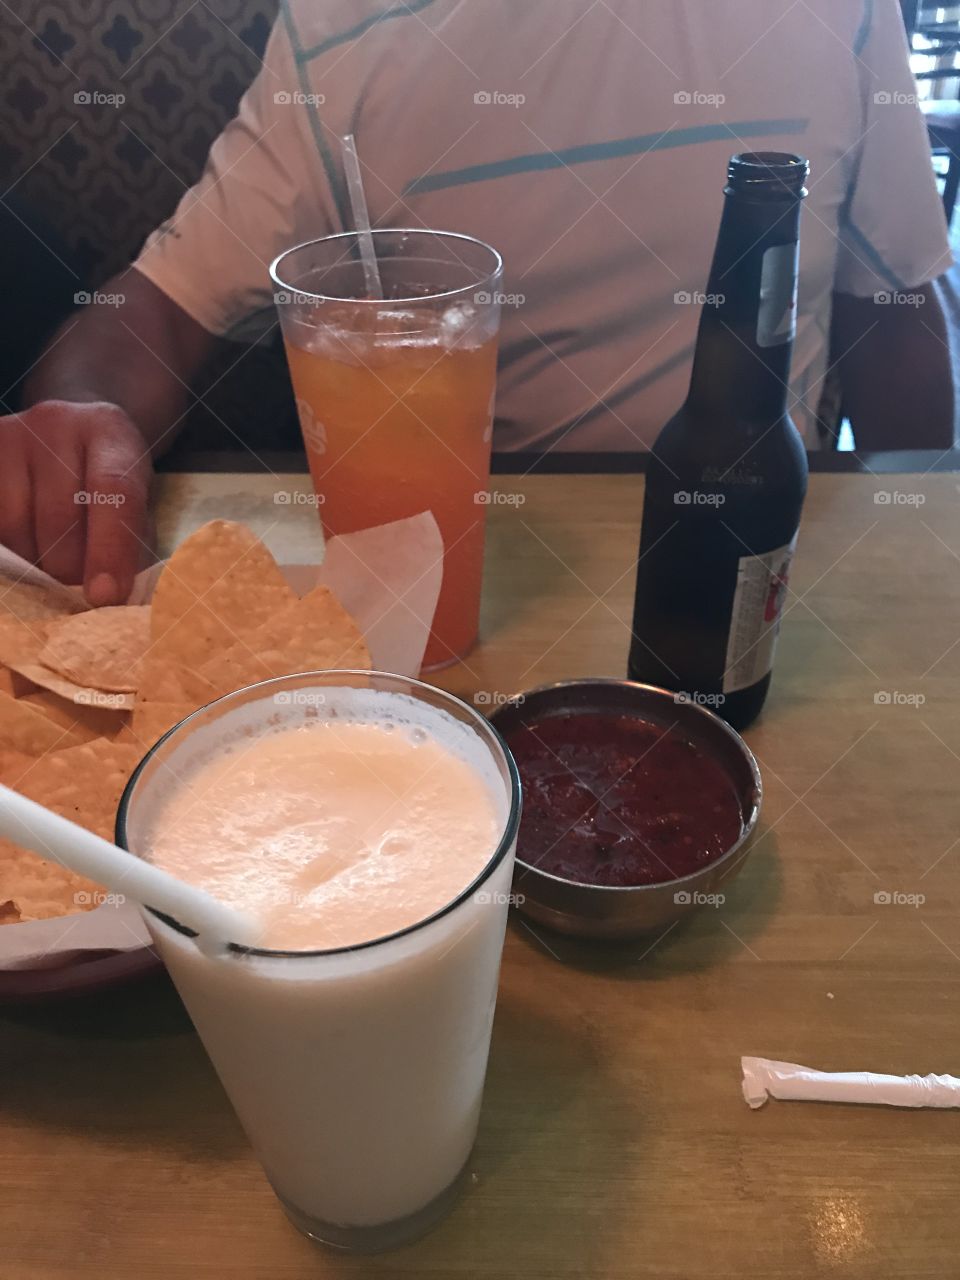 Mexican Restaurant for lunch